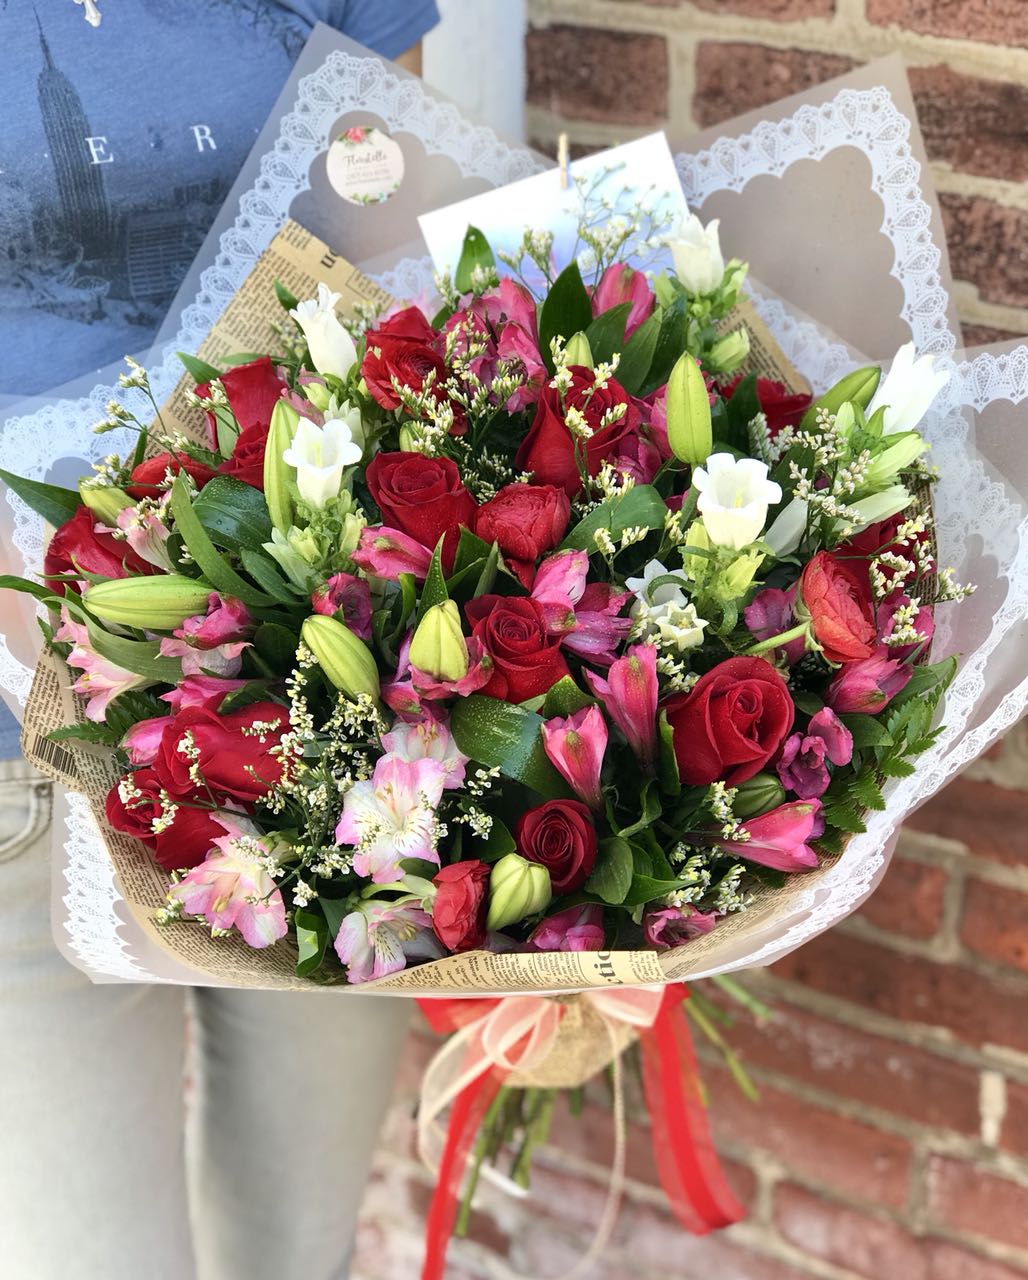 Whether for your significant other or your sister, aunt or grandmother, this delightful floral gift is a sweet way to say "I love you."  Includes:  Red roses, bells, pink alstroemeria, white lilies, limonium, assorted greens. Wrapped in craft paper. Free message card